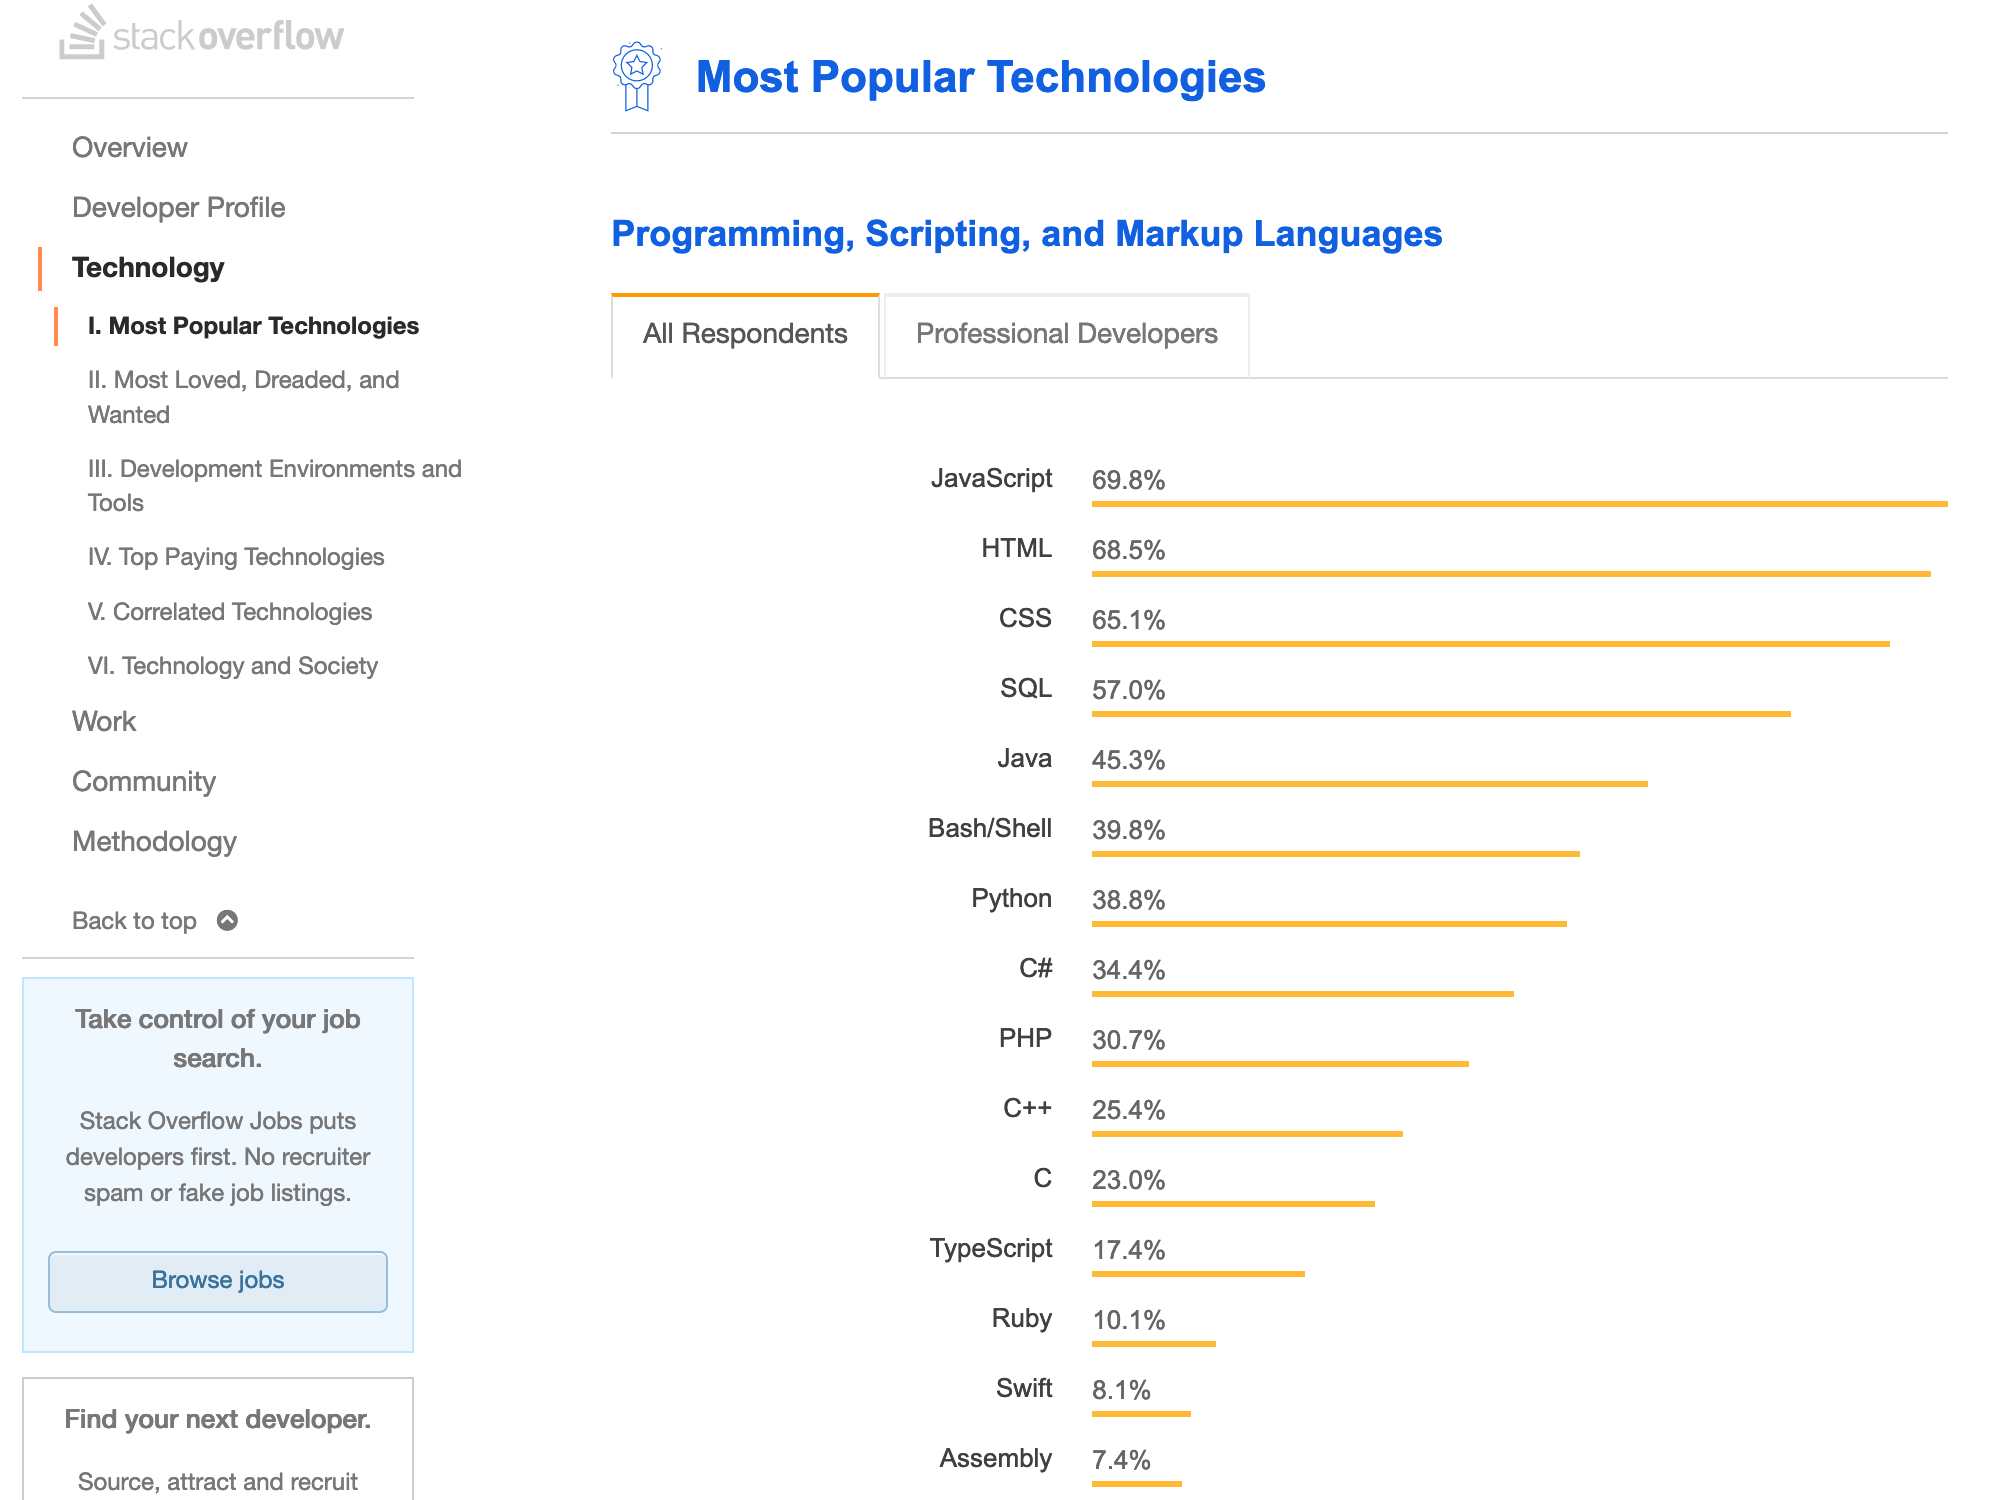 According to StackOverflow, Javascript is now the most popular programming language.